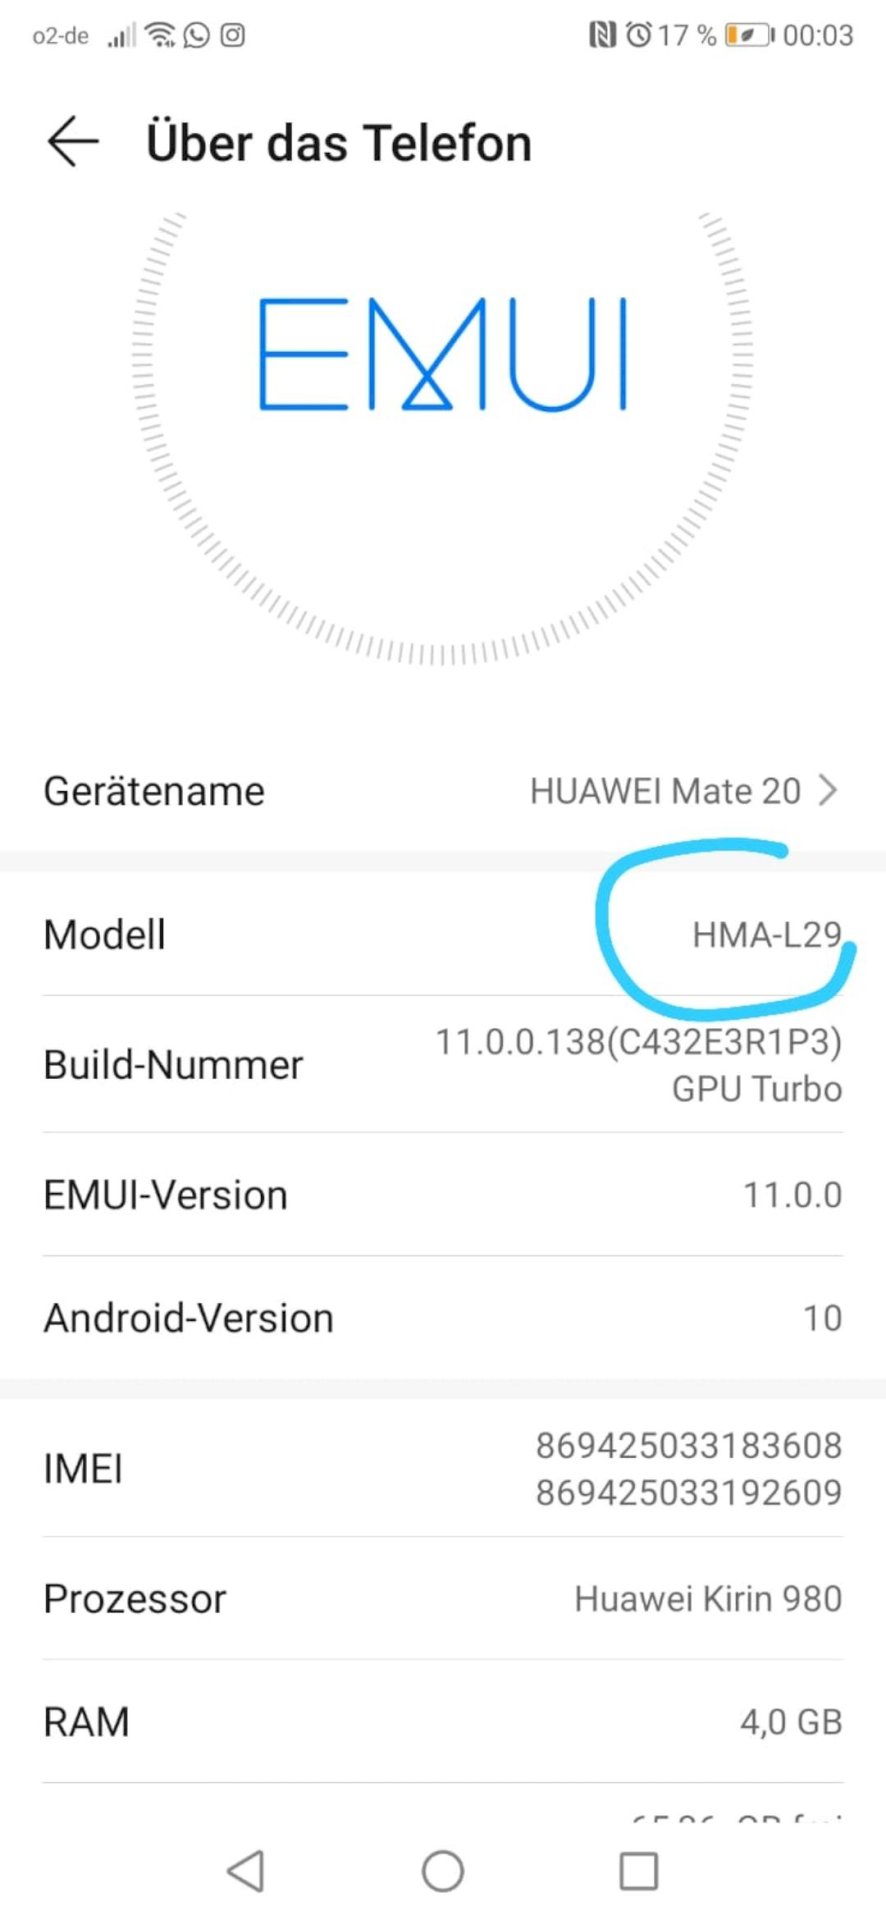 Difference between the Huawei Mate 20 models